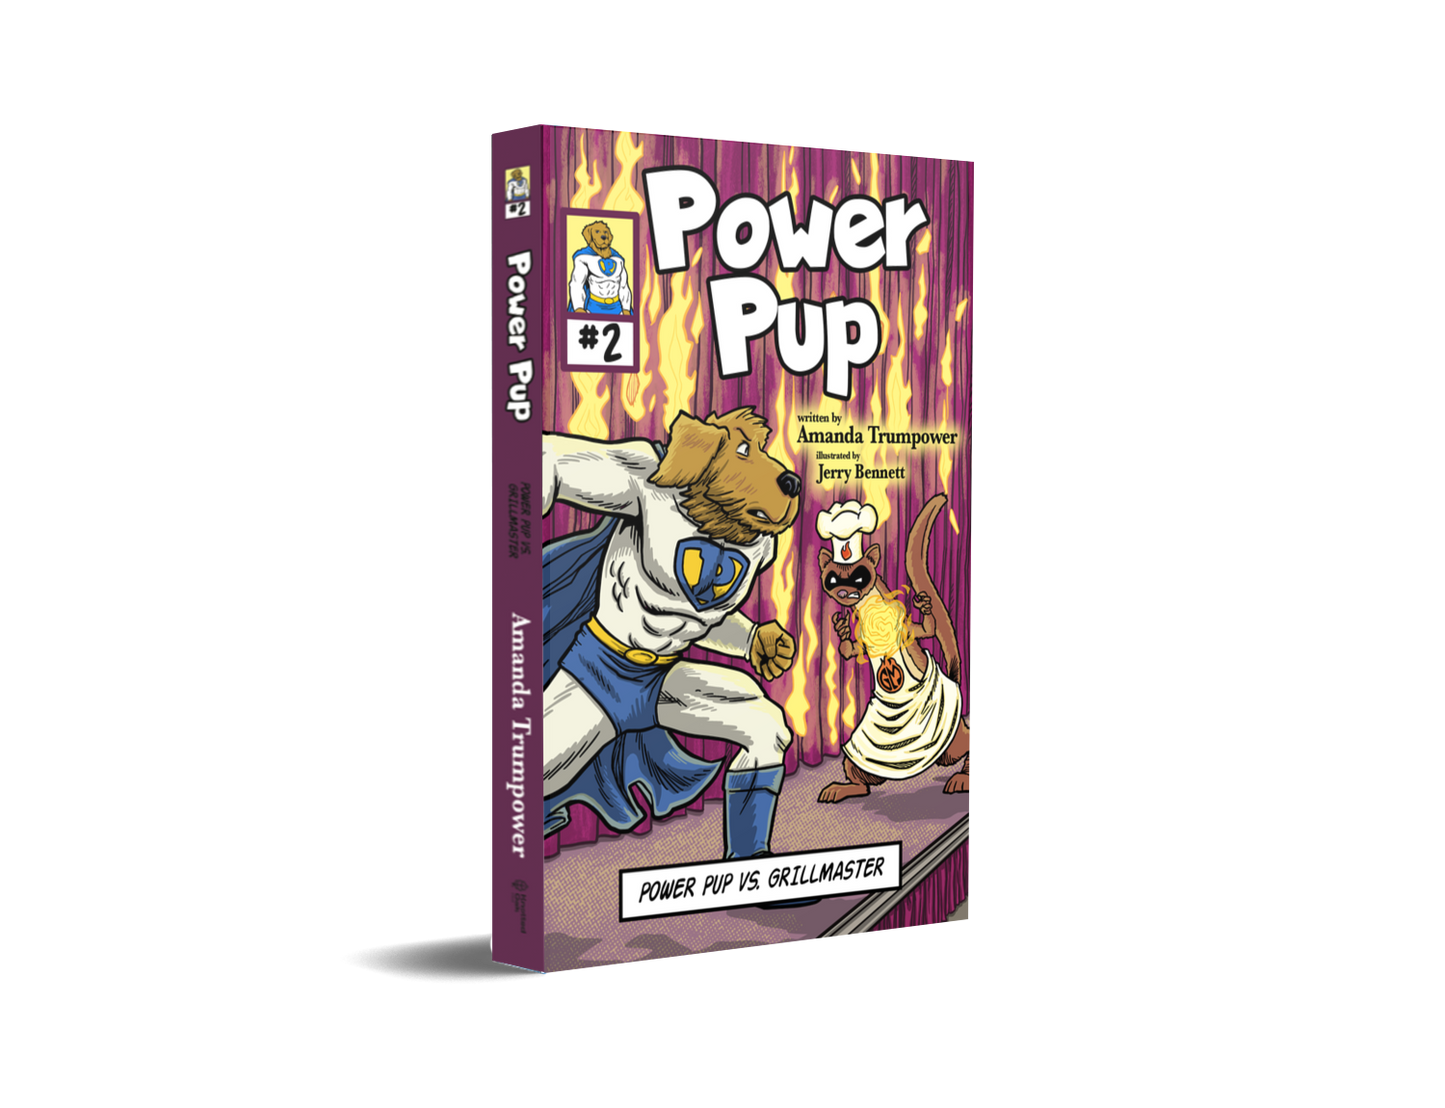 Power Pup #2: Power Pup vs. Grillmaster